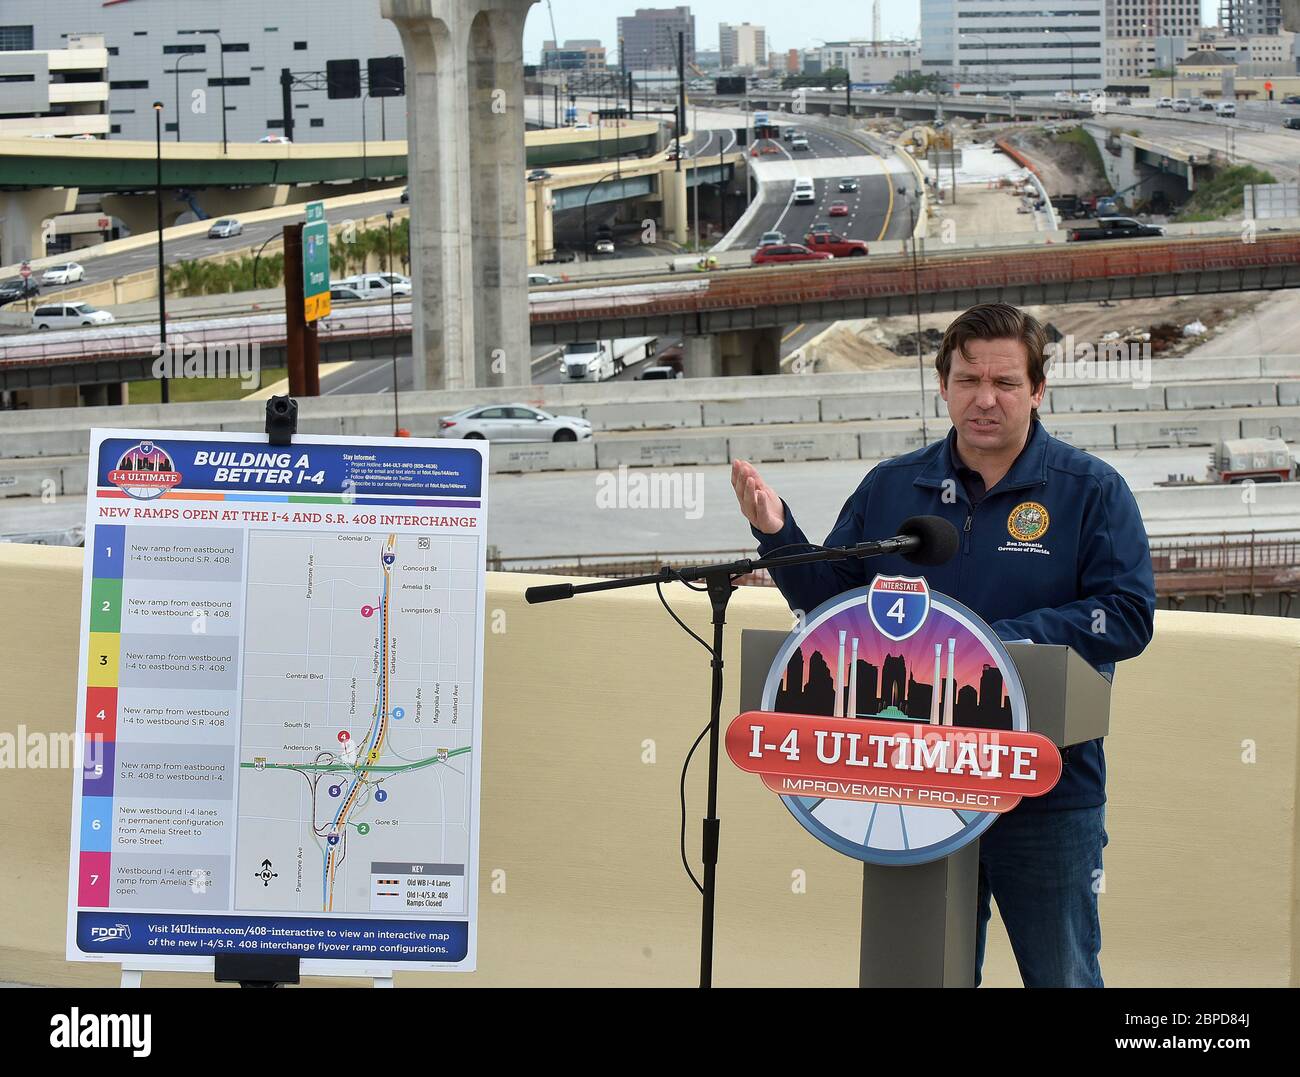 May 18, 2020 - Orlando, Florida, United States - Florida Gov. Ron DeSantis speaks at a news conference on May 18, 2020 at the newly completed I-4 and State Road 408 interchange which will open to traffic tonight in downtown Orlando, Florida. DeSantis explained that progress on the 21-mile I-4 Ultimate Project was expedited at his direction due to the decrease in traffic during the coronavirus crisis. (Paul Hennessy/Alamy) Stock Photo